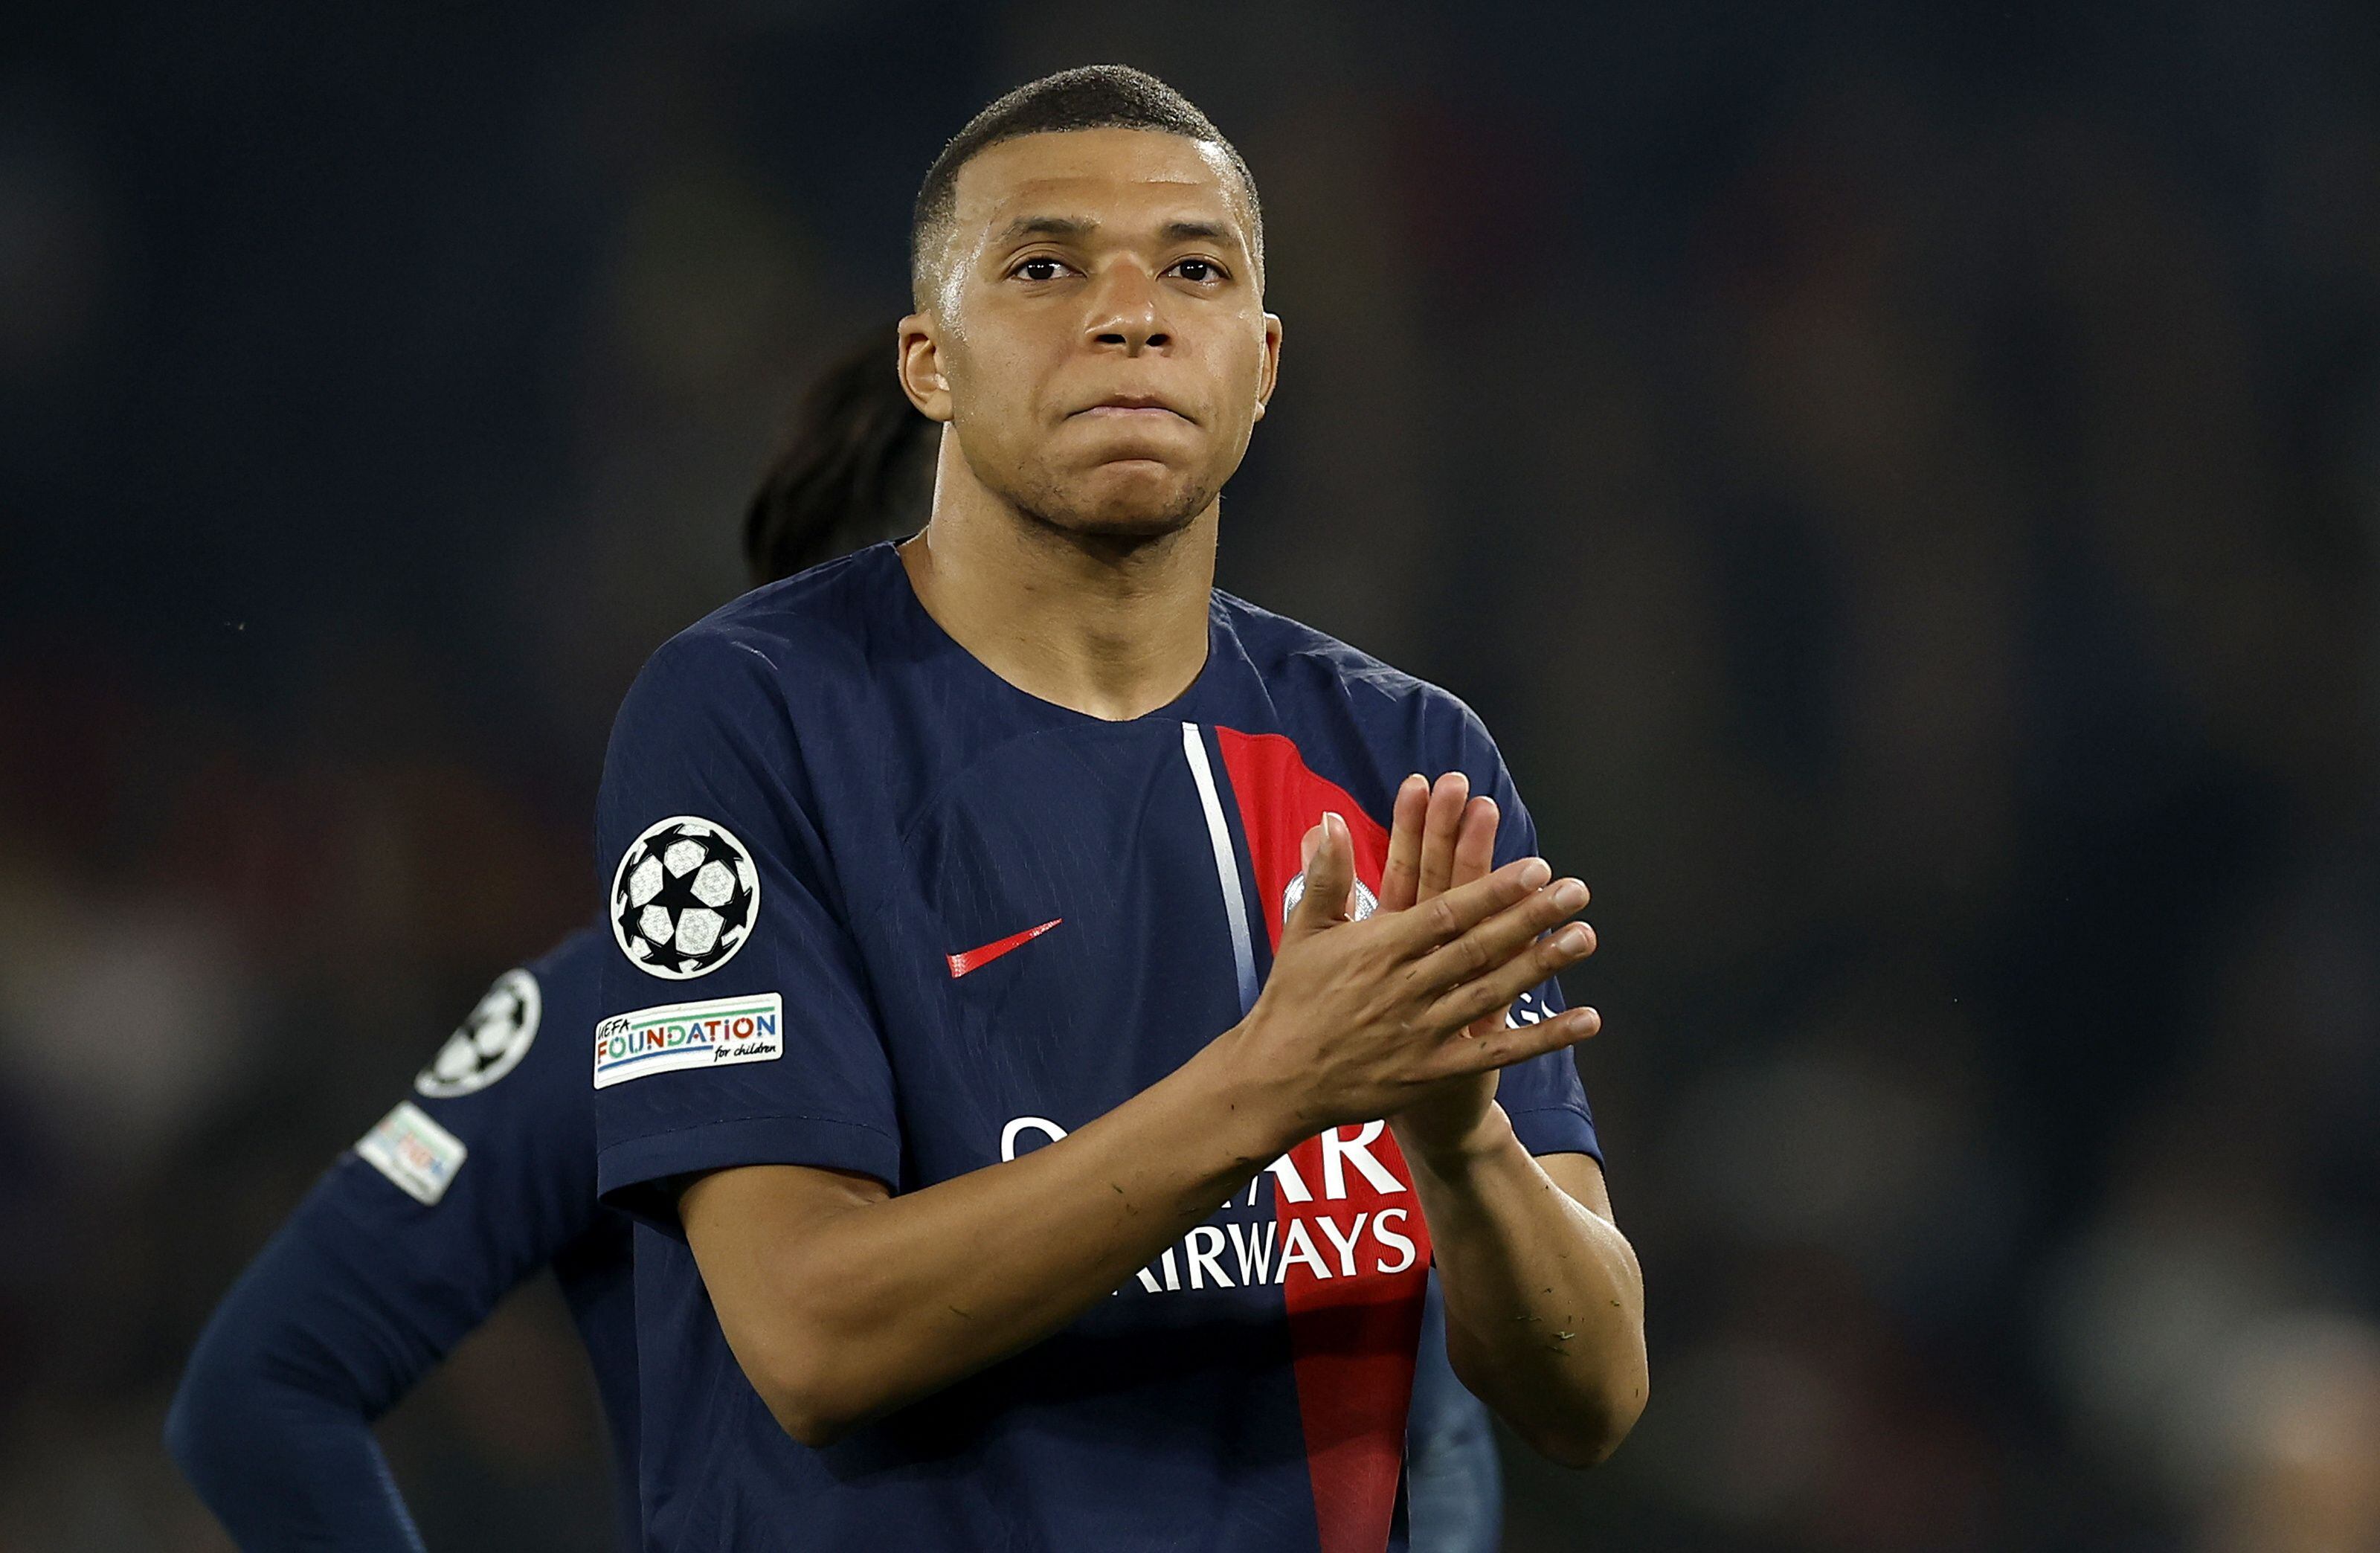 kylian mbappe expected to join real madrid after leaving psg at end of season